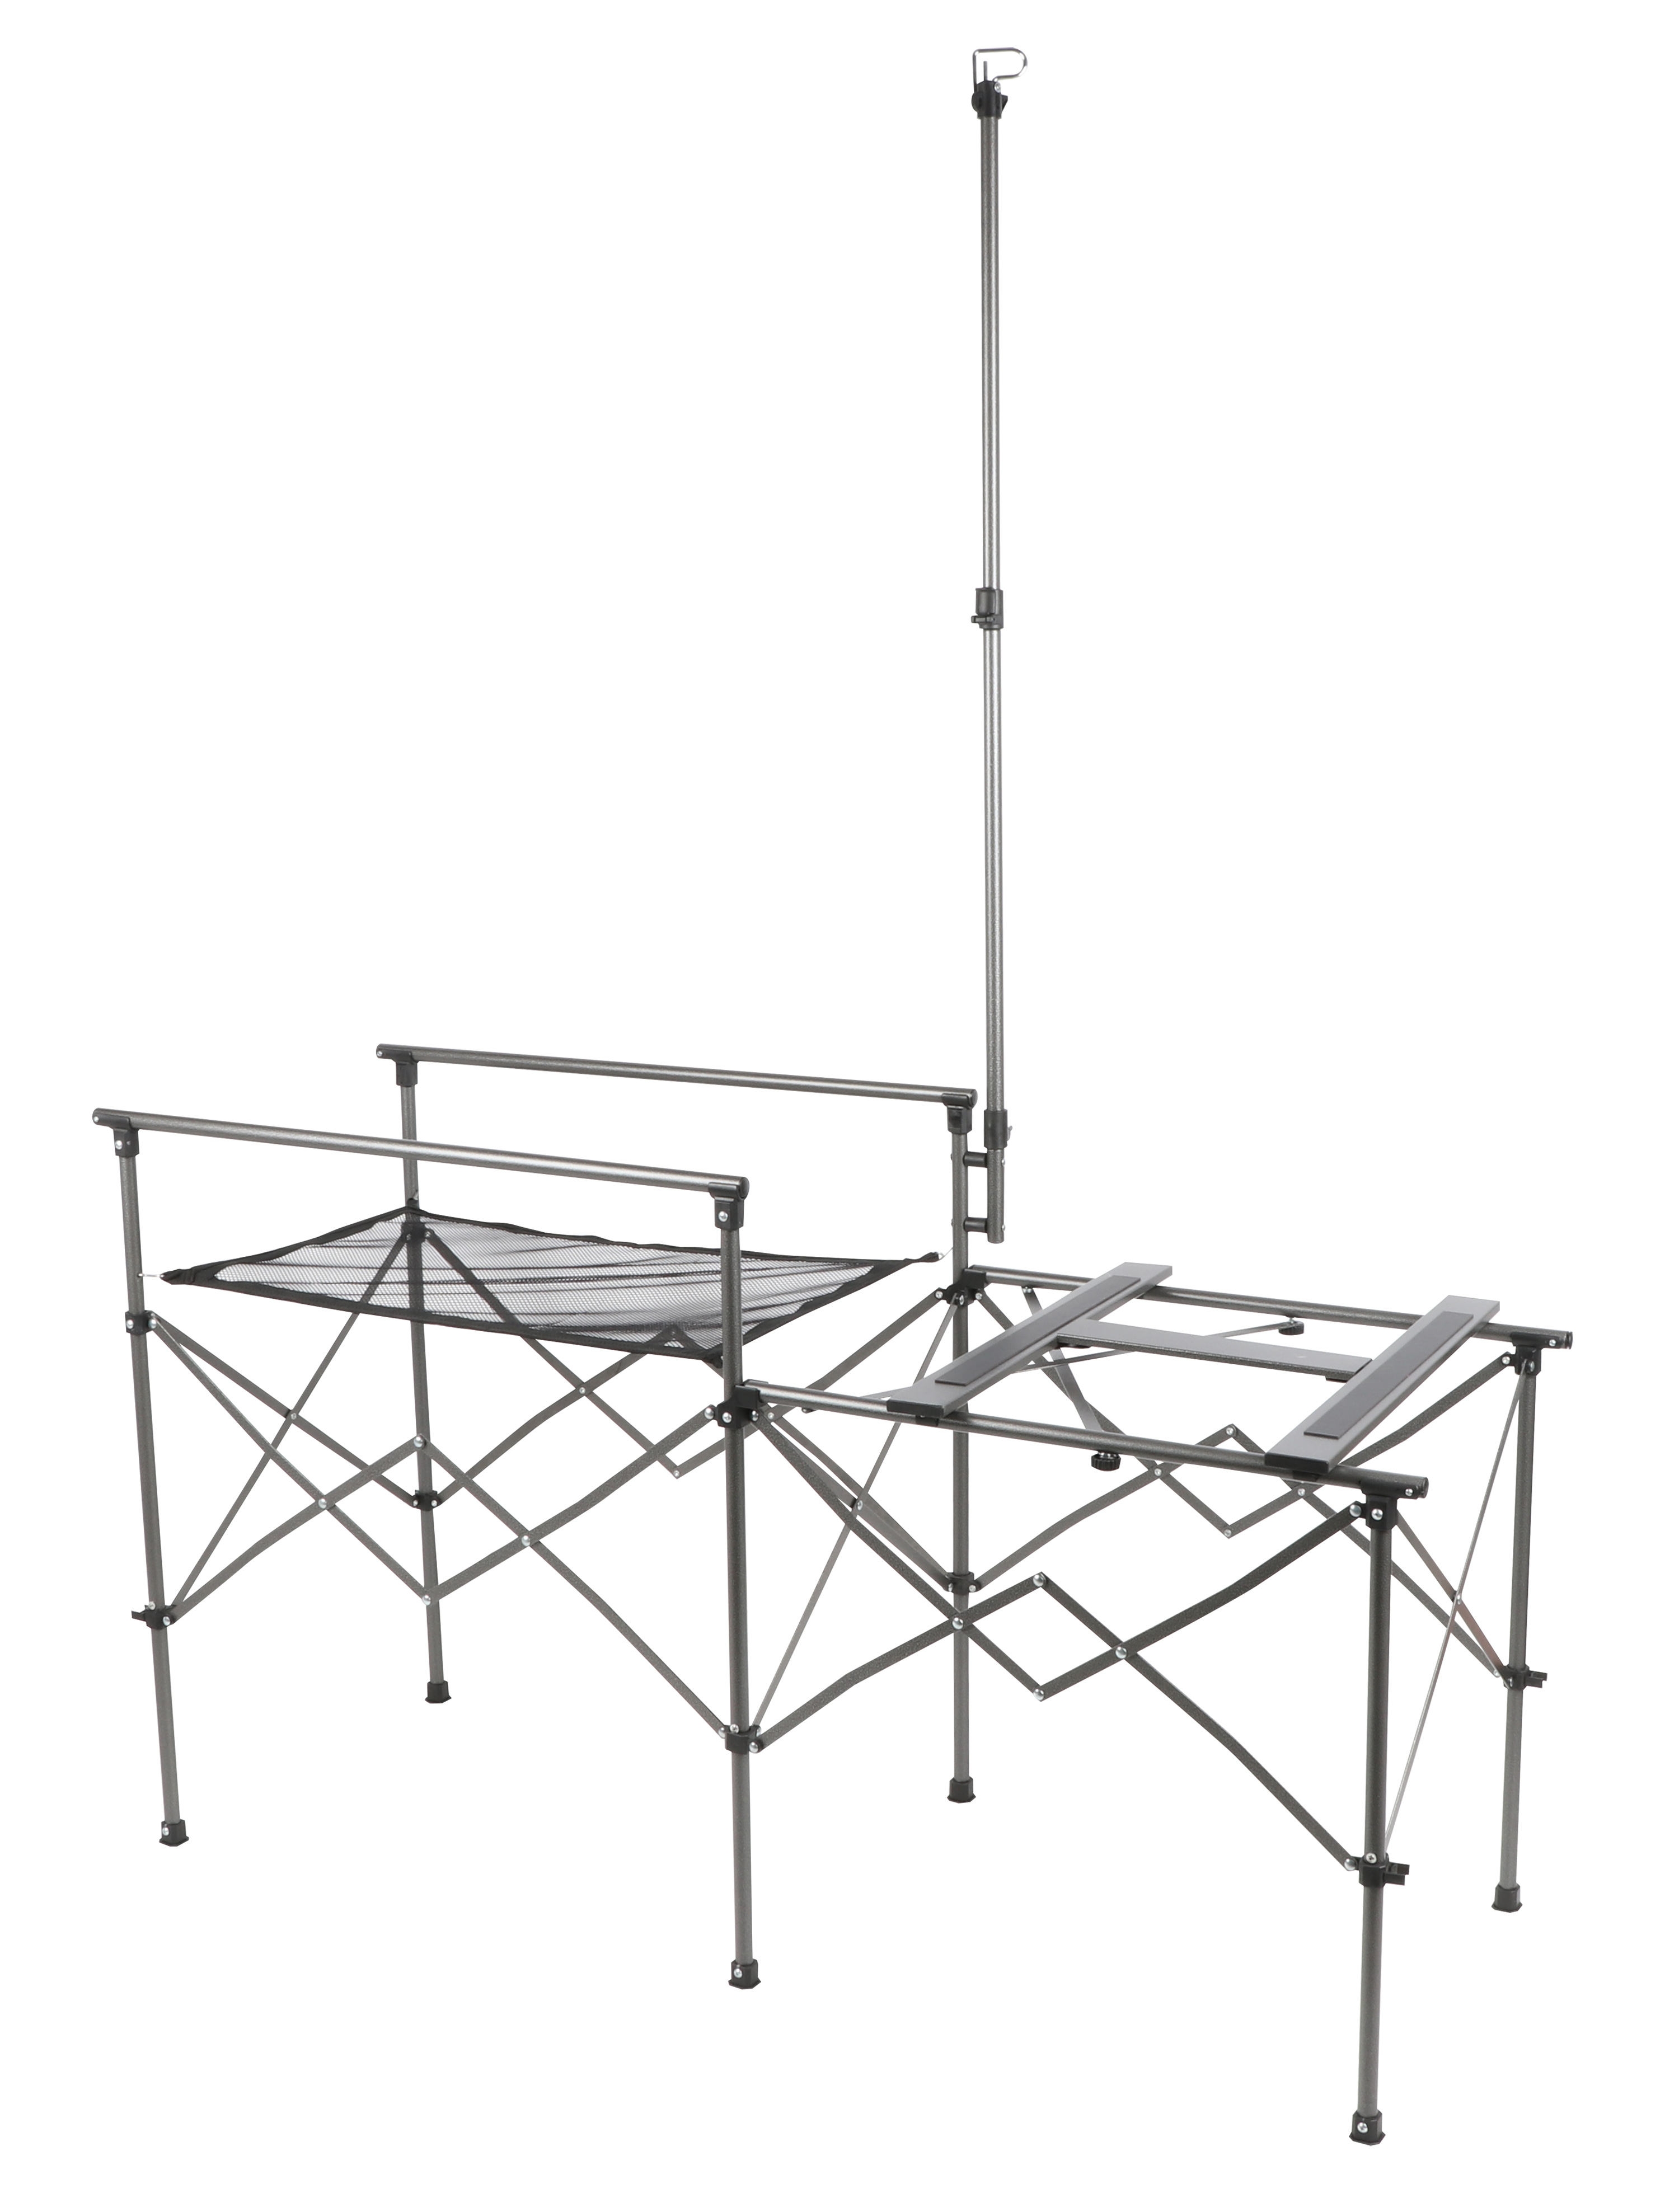 Ozark Trail Camping Table, Silver, 56"L x 21"W x 72"H - image 4 of 16